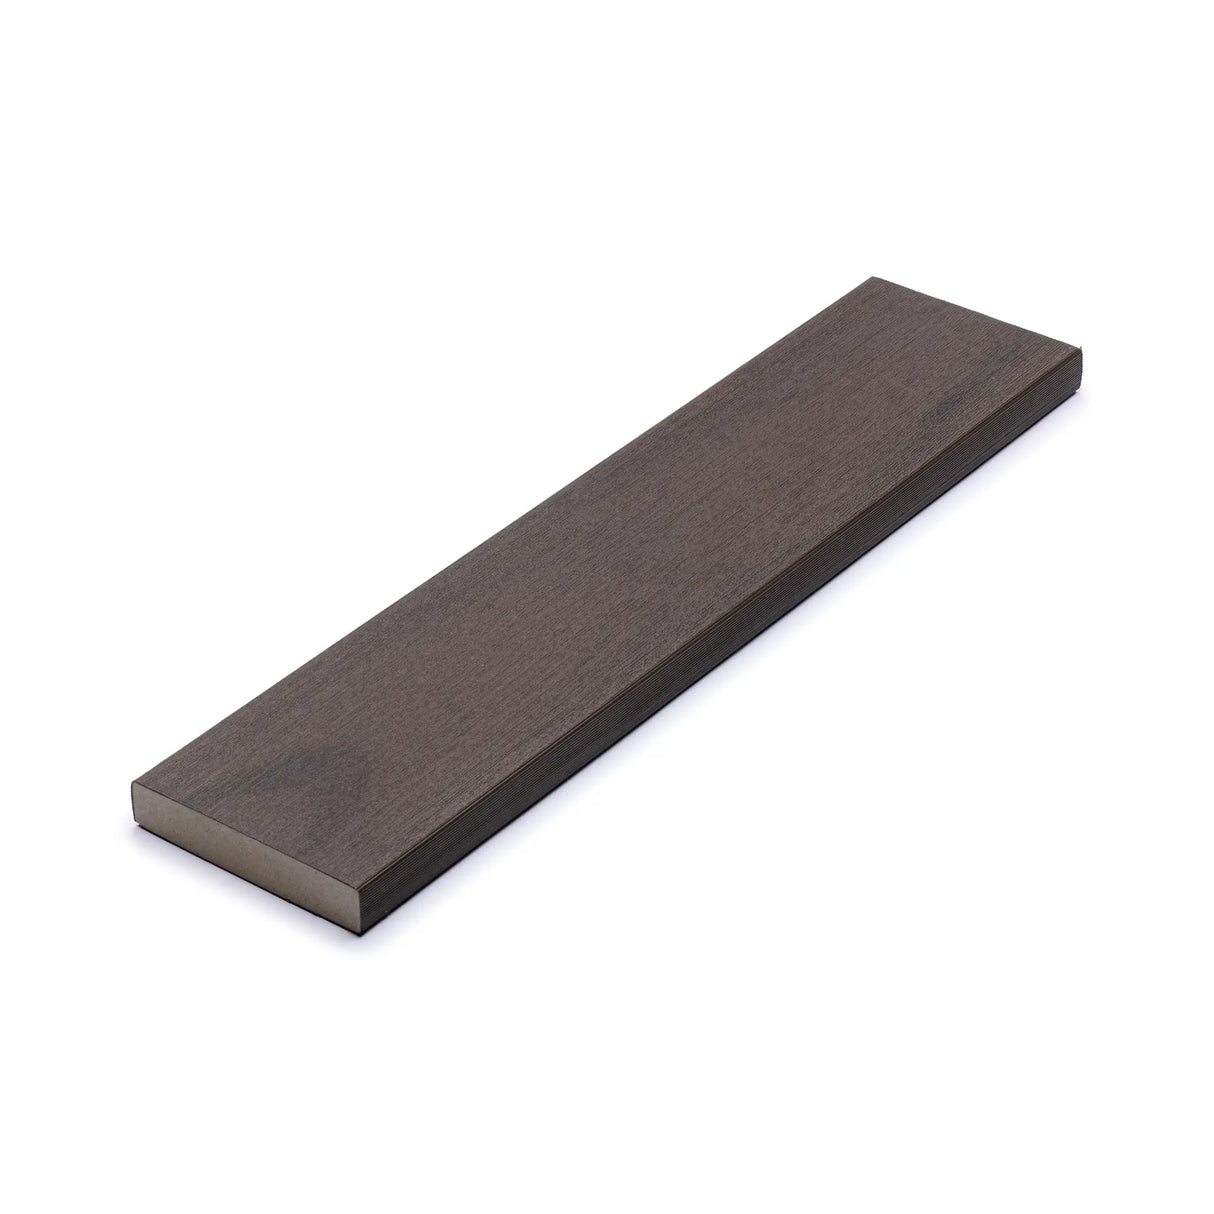 TruNorth® Enviroboard Composite Decking from $4.25/ft - E.Koot/South AB